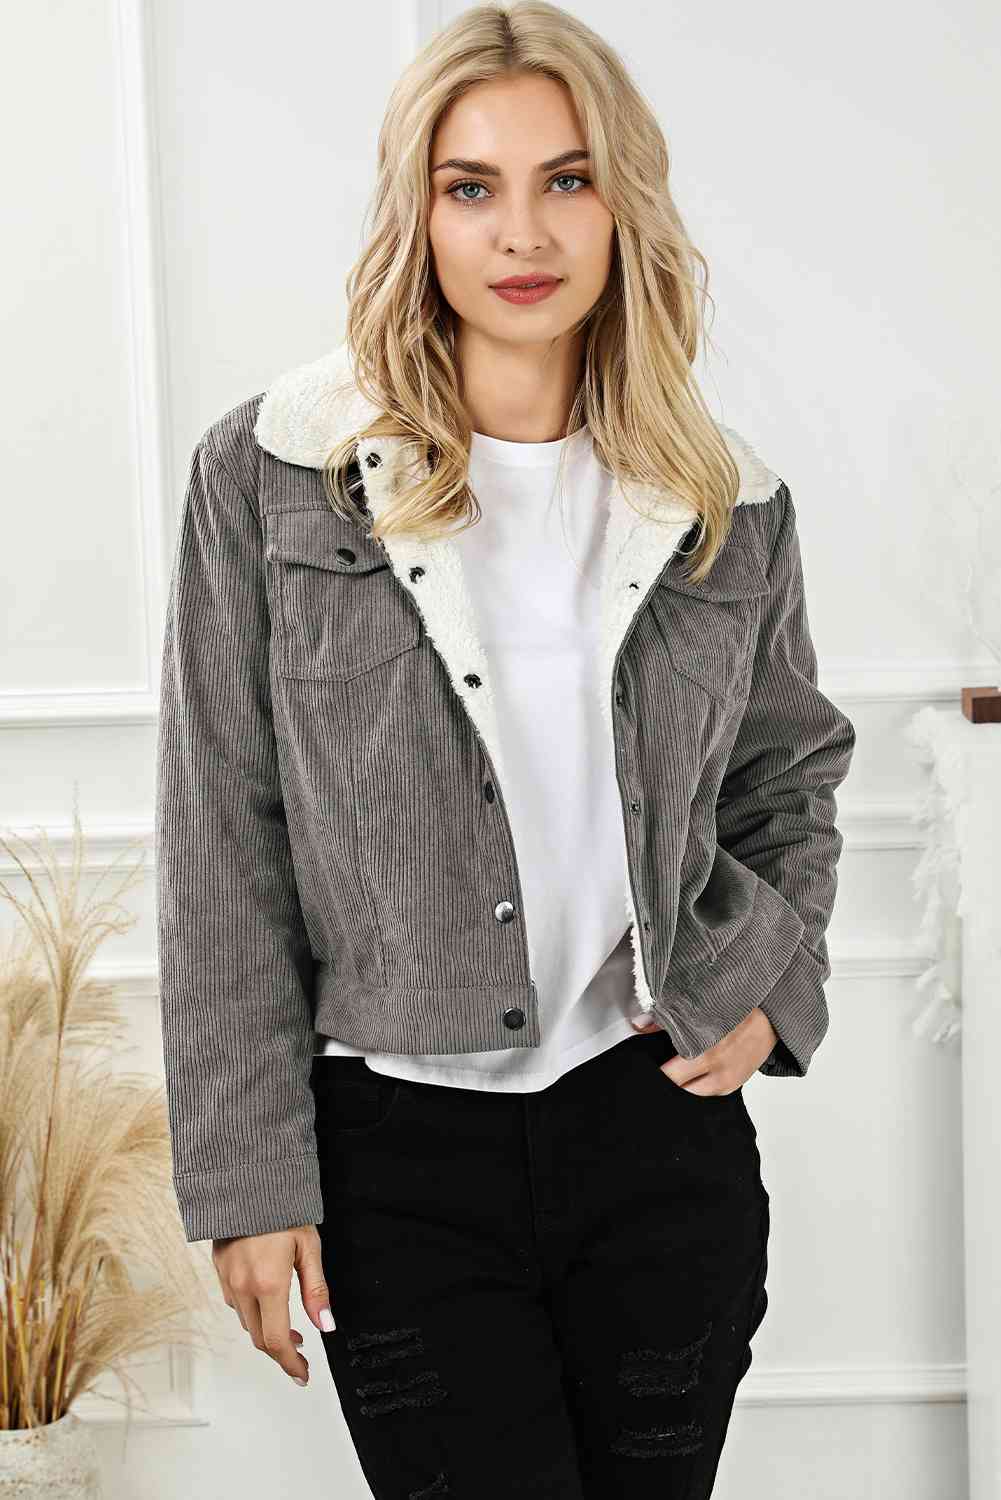 Snap Down Collared Jacket - Bellisima Clothing Collective